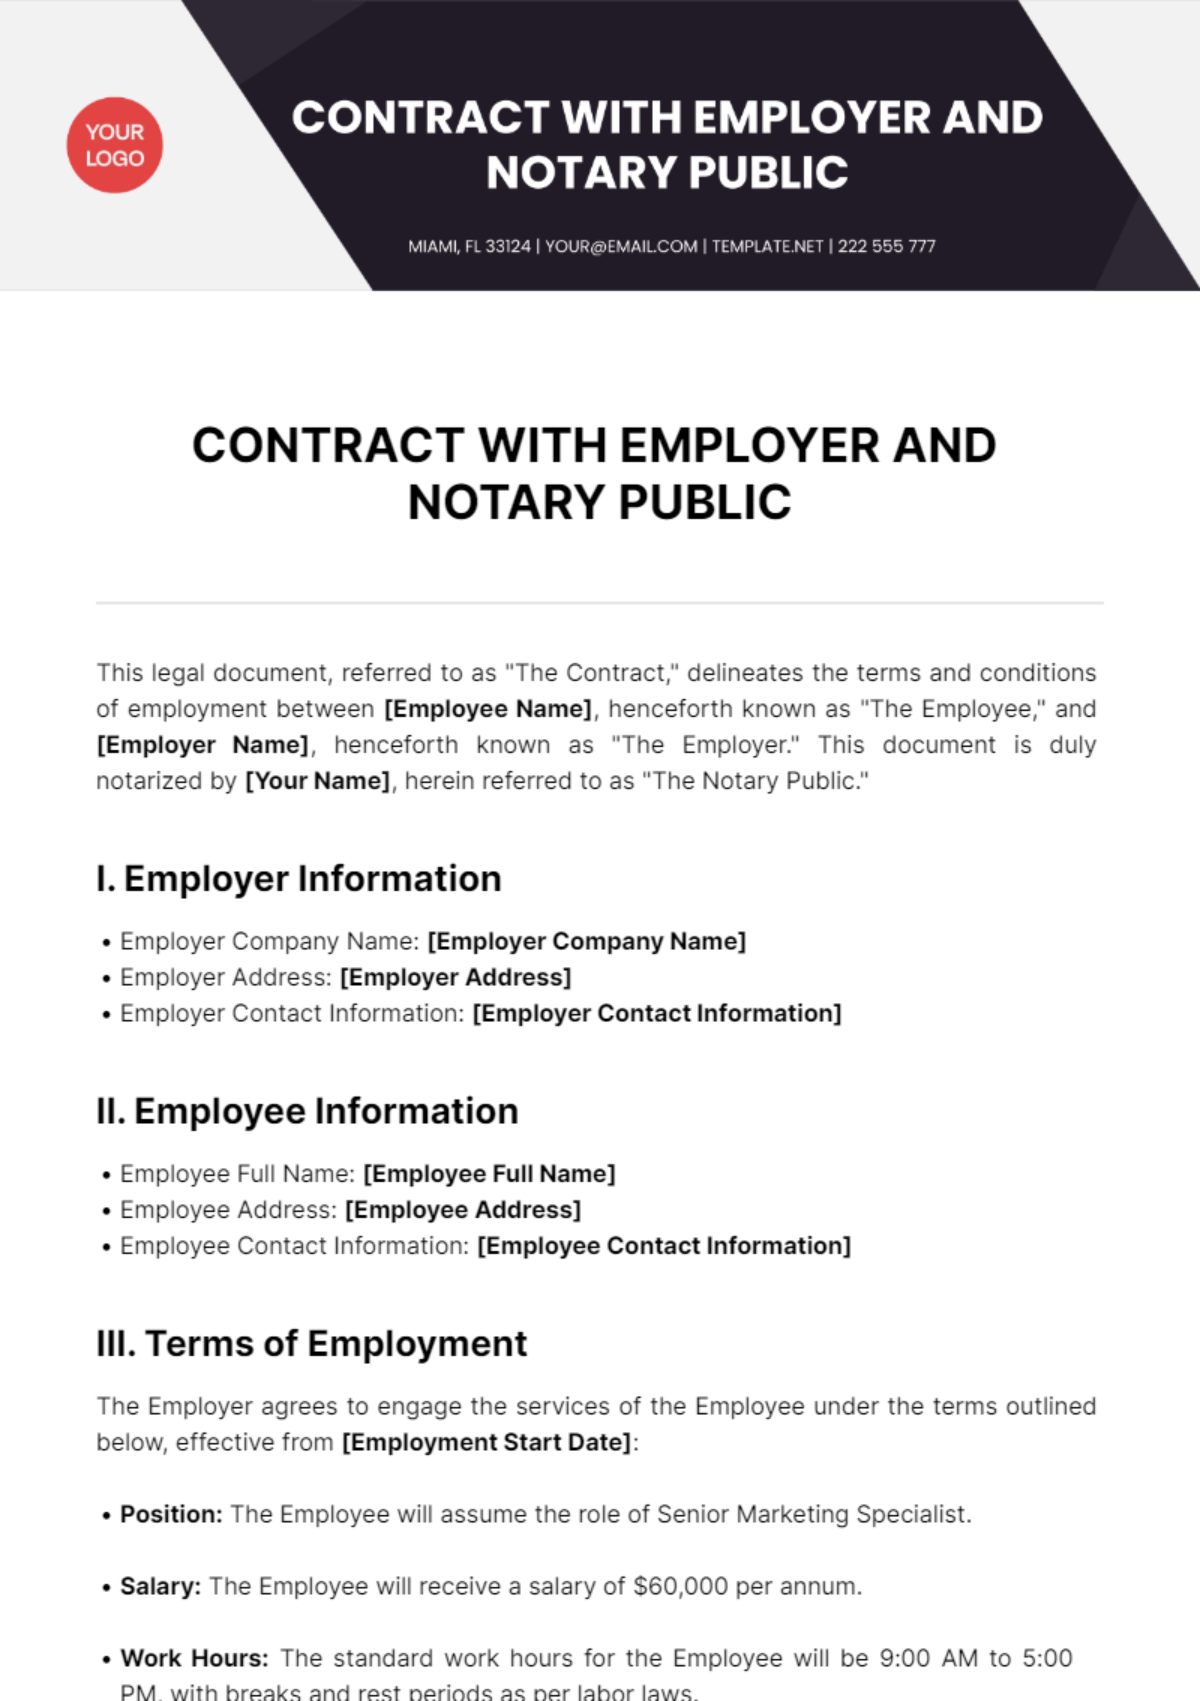 Free Contract With Employer and Notary Public Template